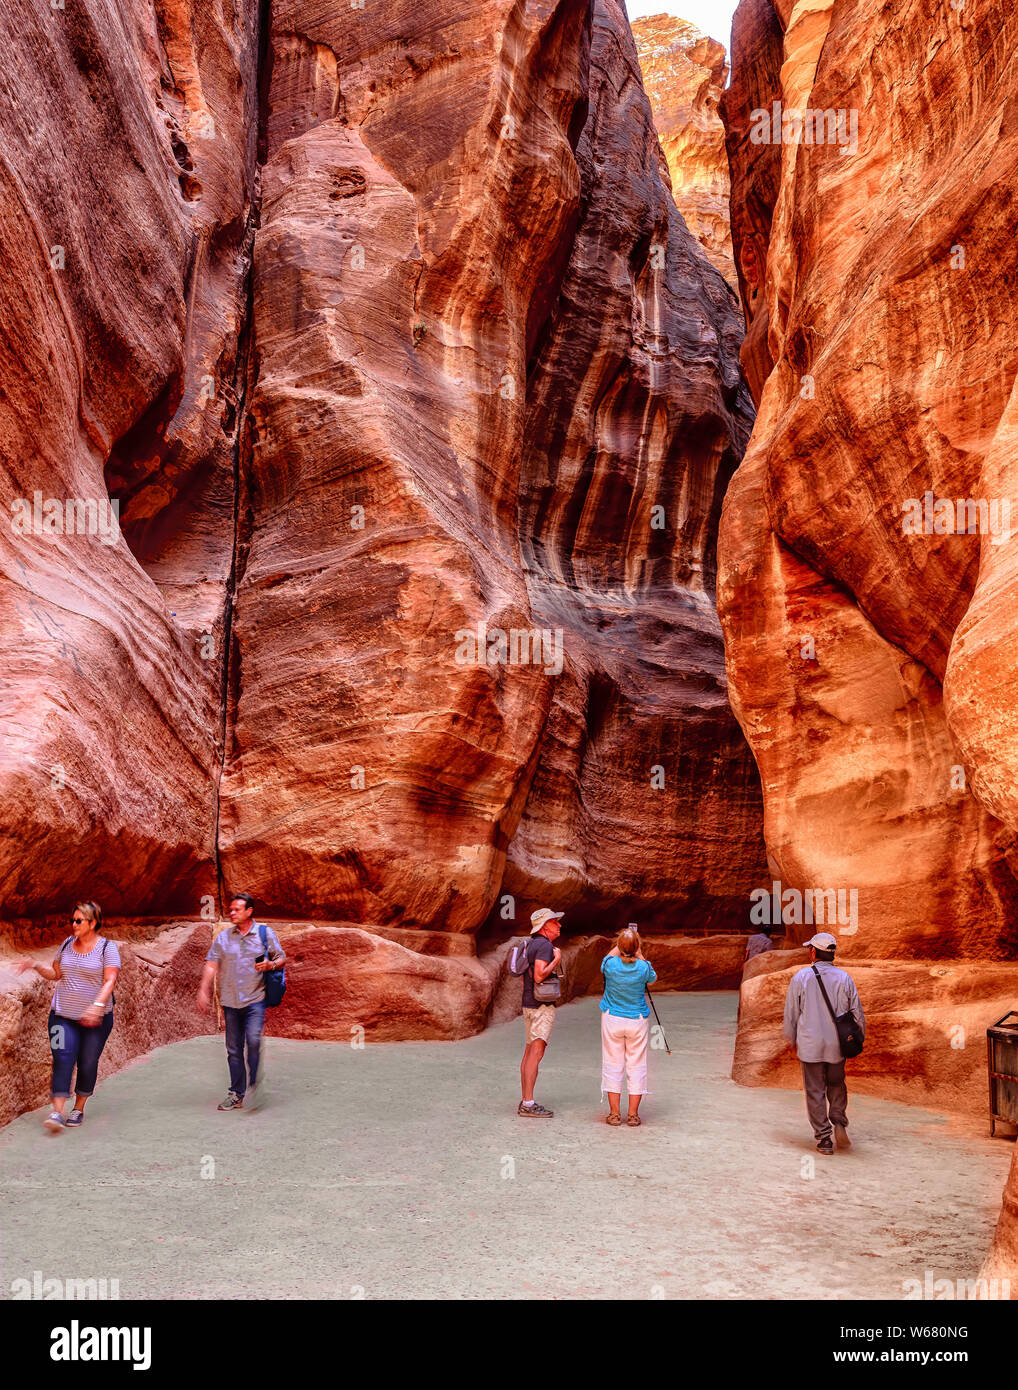 Tourists inside the Siq, the main entrance to the ancient Nabatean city of Petra in Jordan Stock Photo